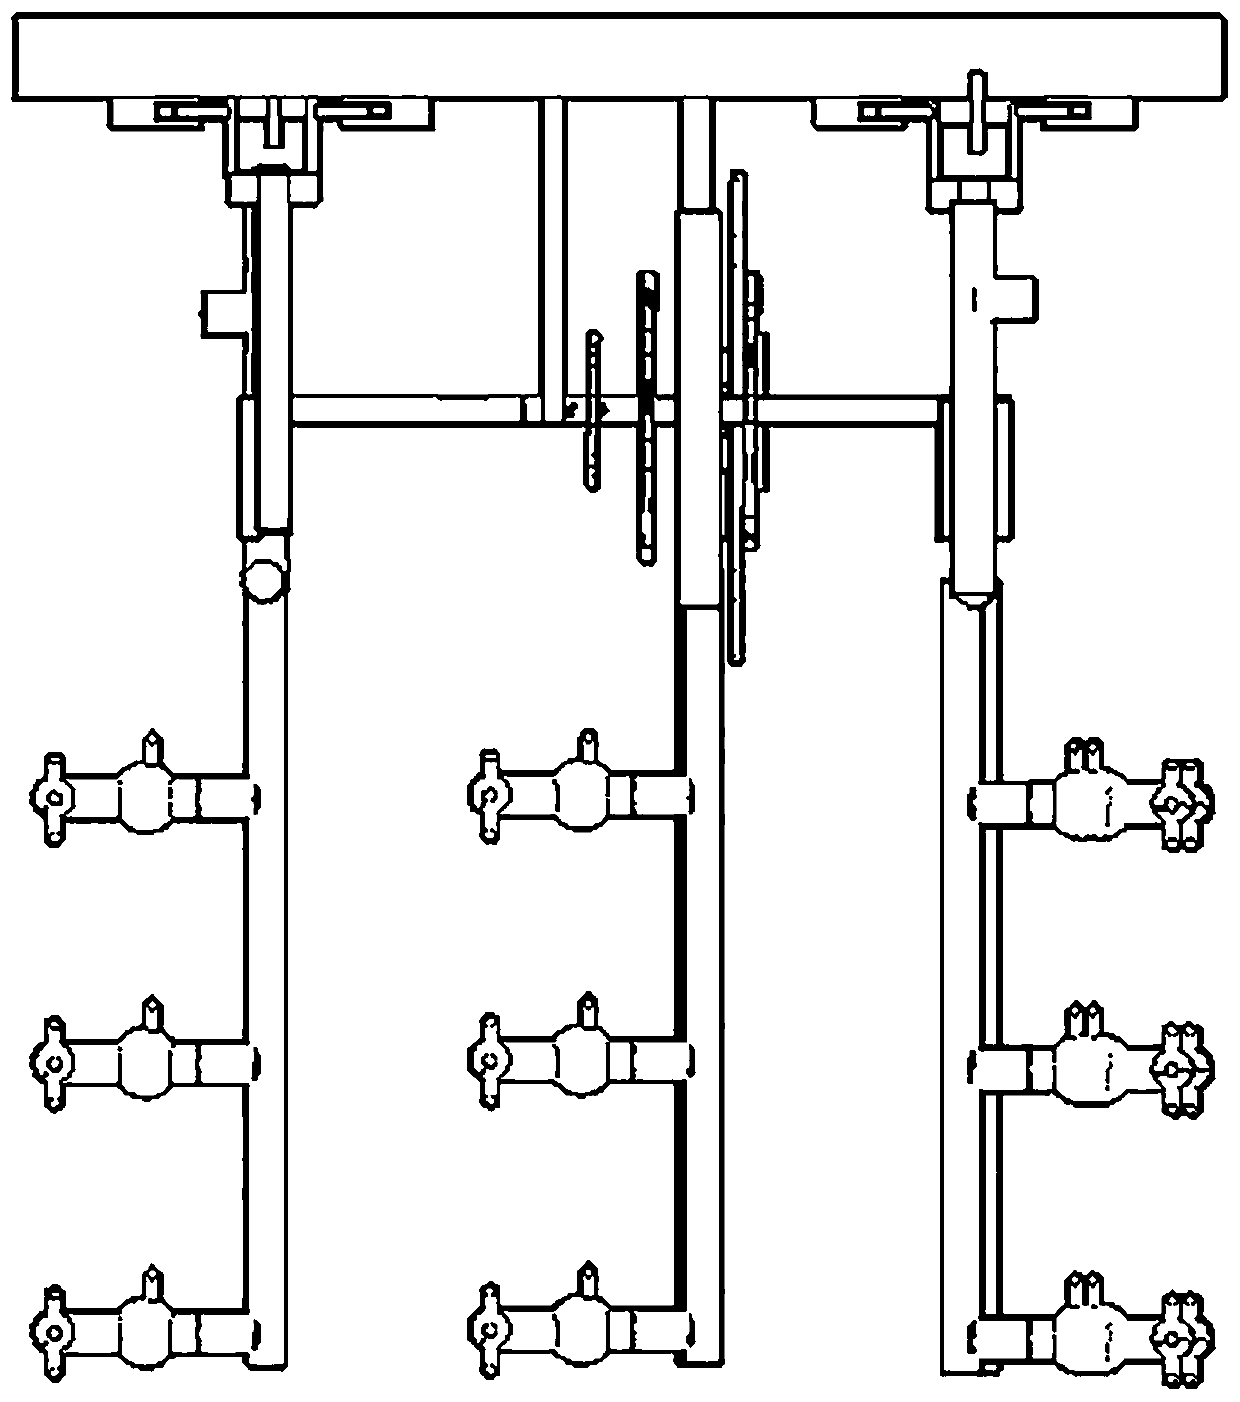 Position-adjustable auxiliary device for liquid fertilizer spraying work